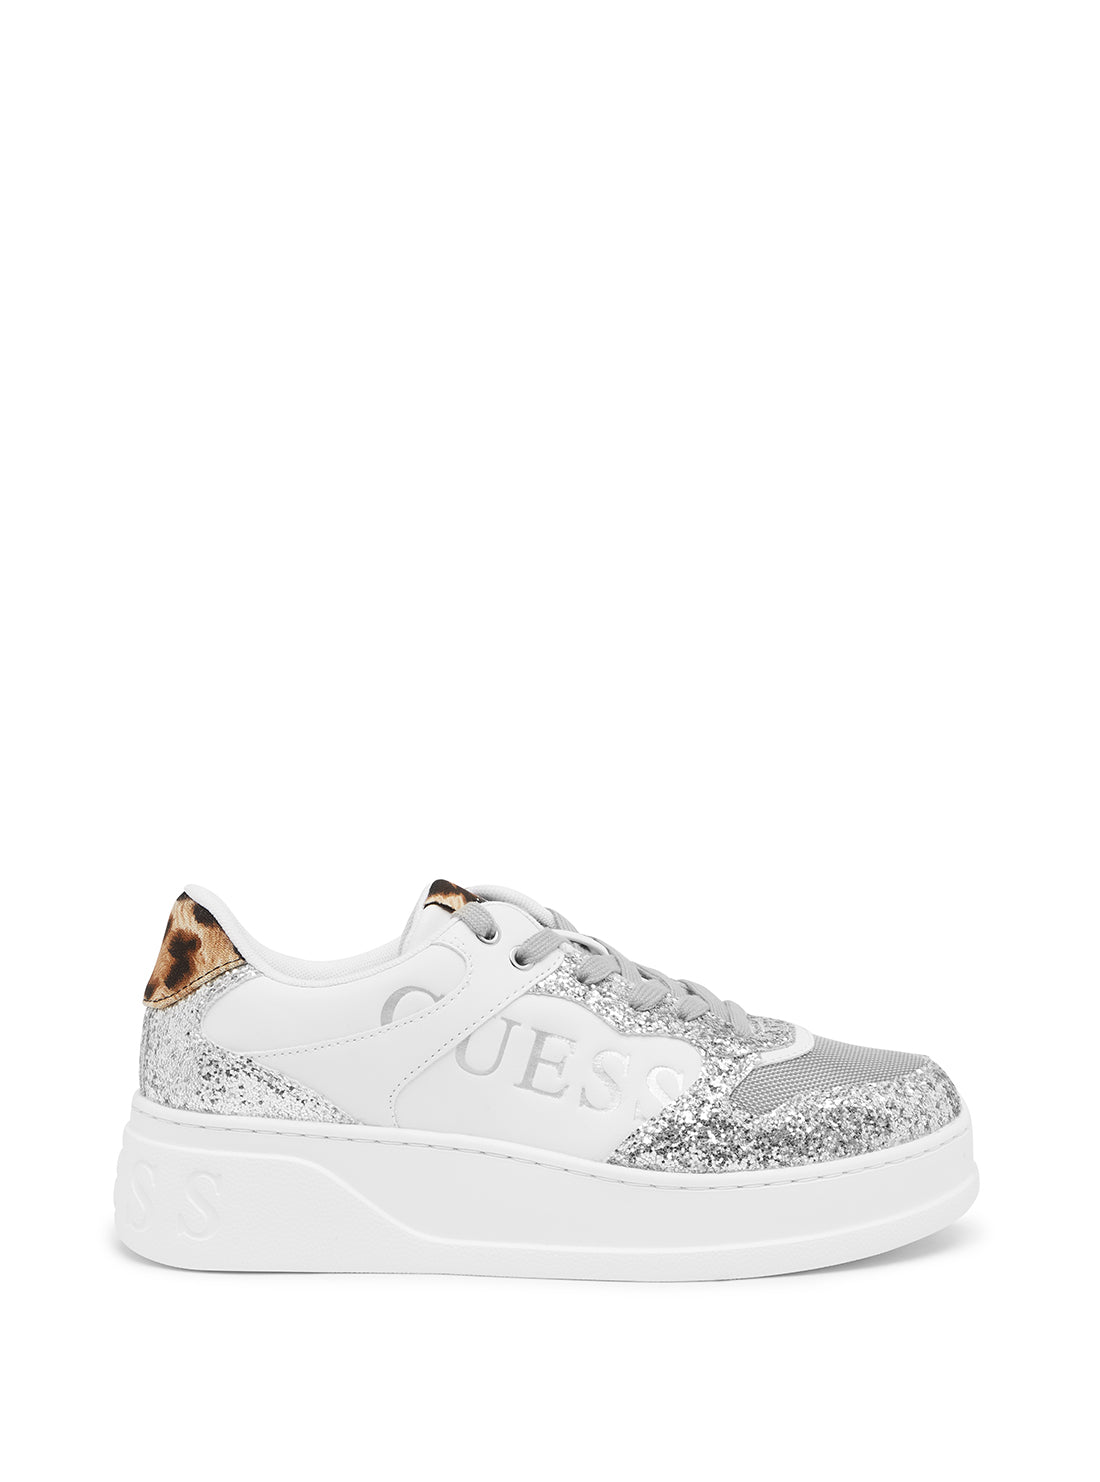 GUESS Women's White Silver Leopard Cleva Low Top Sneakers CLEVA Side View